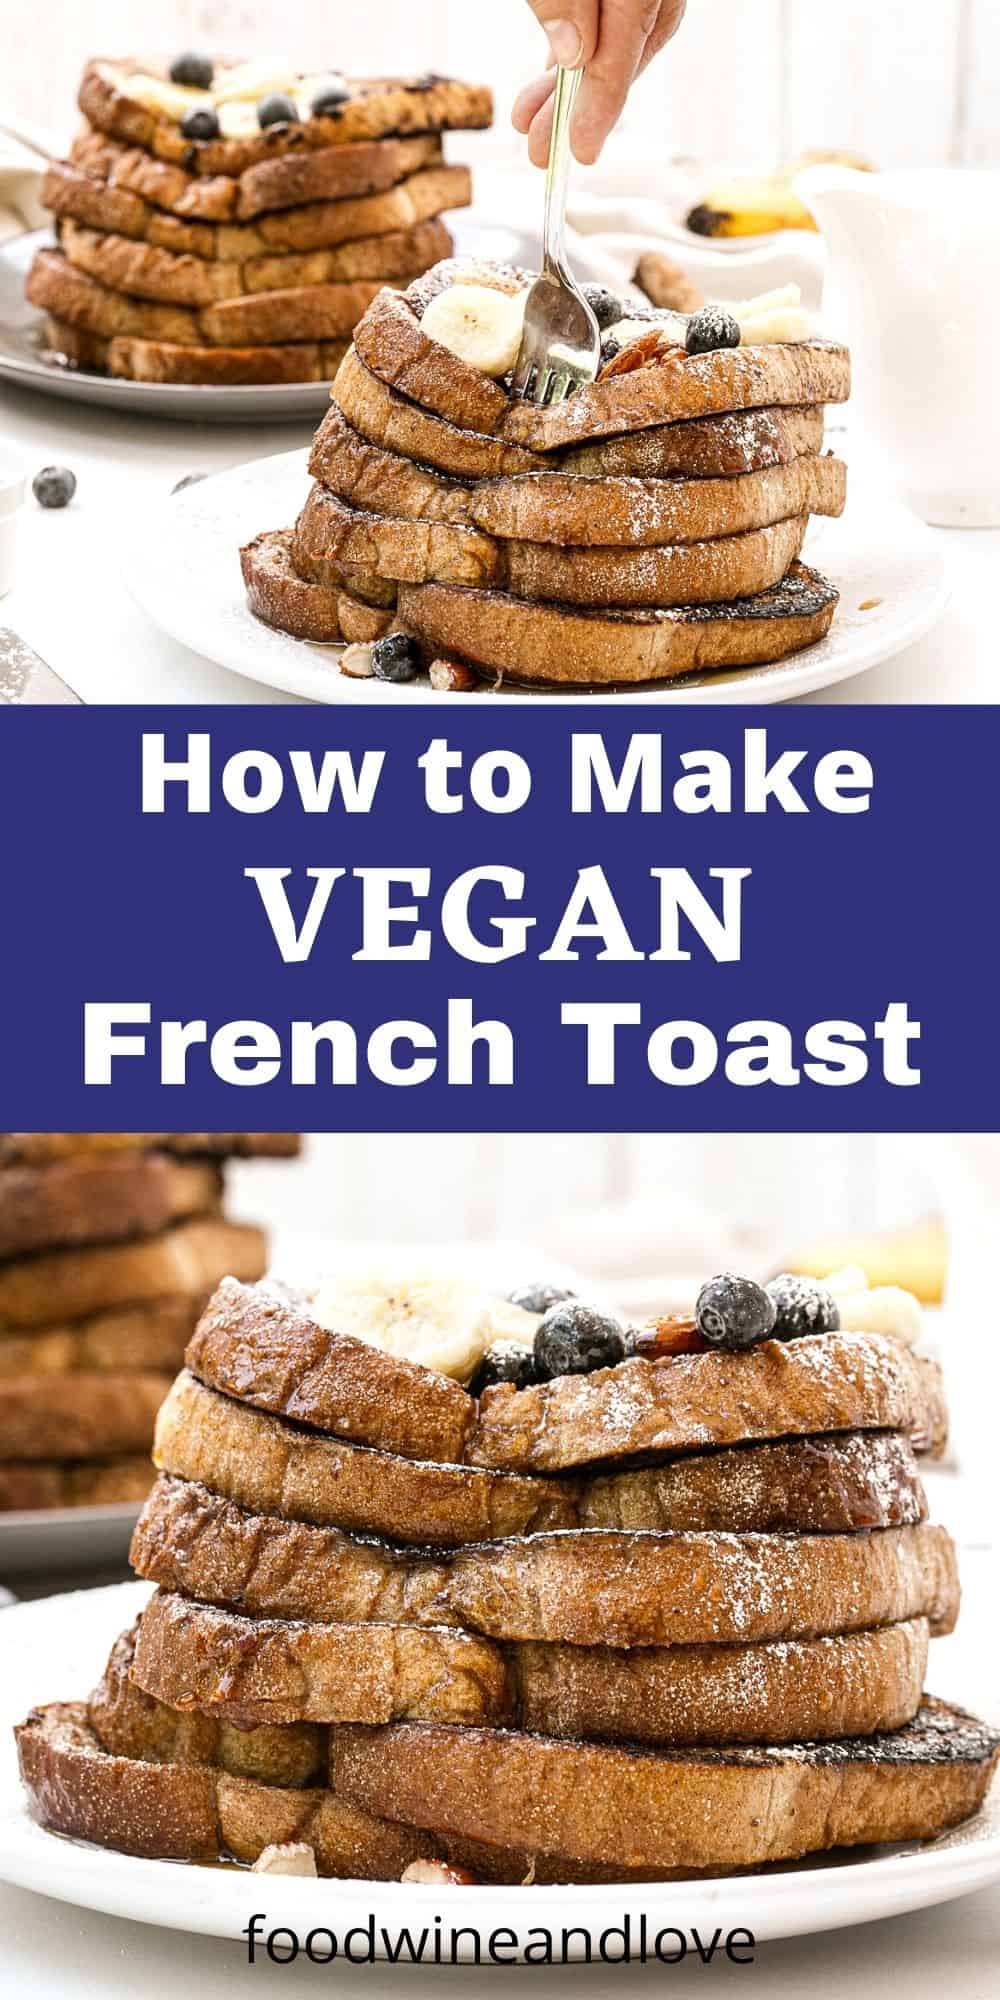 How to Make Vegan French Toast